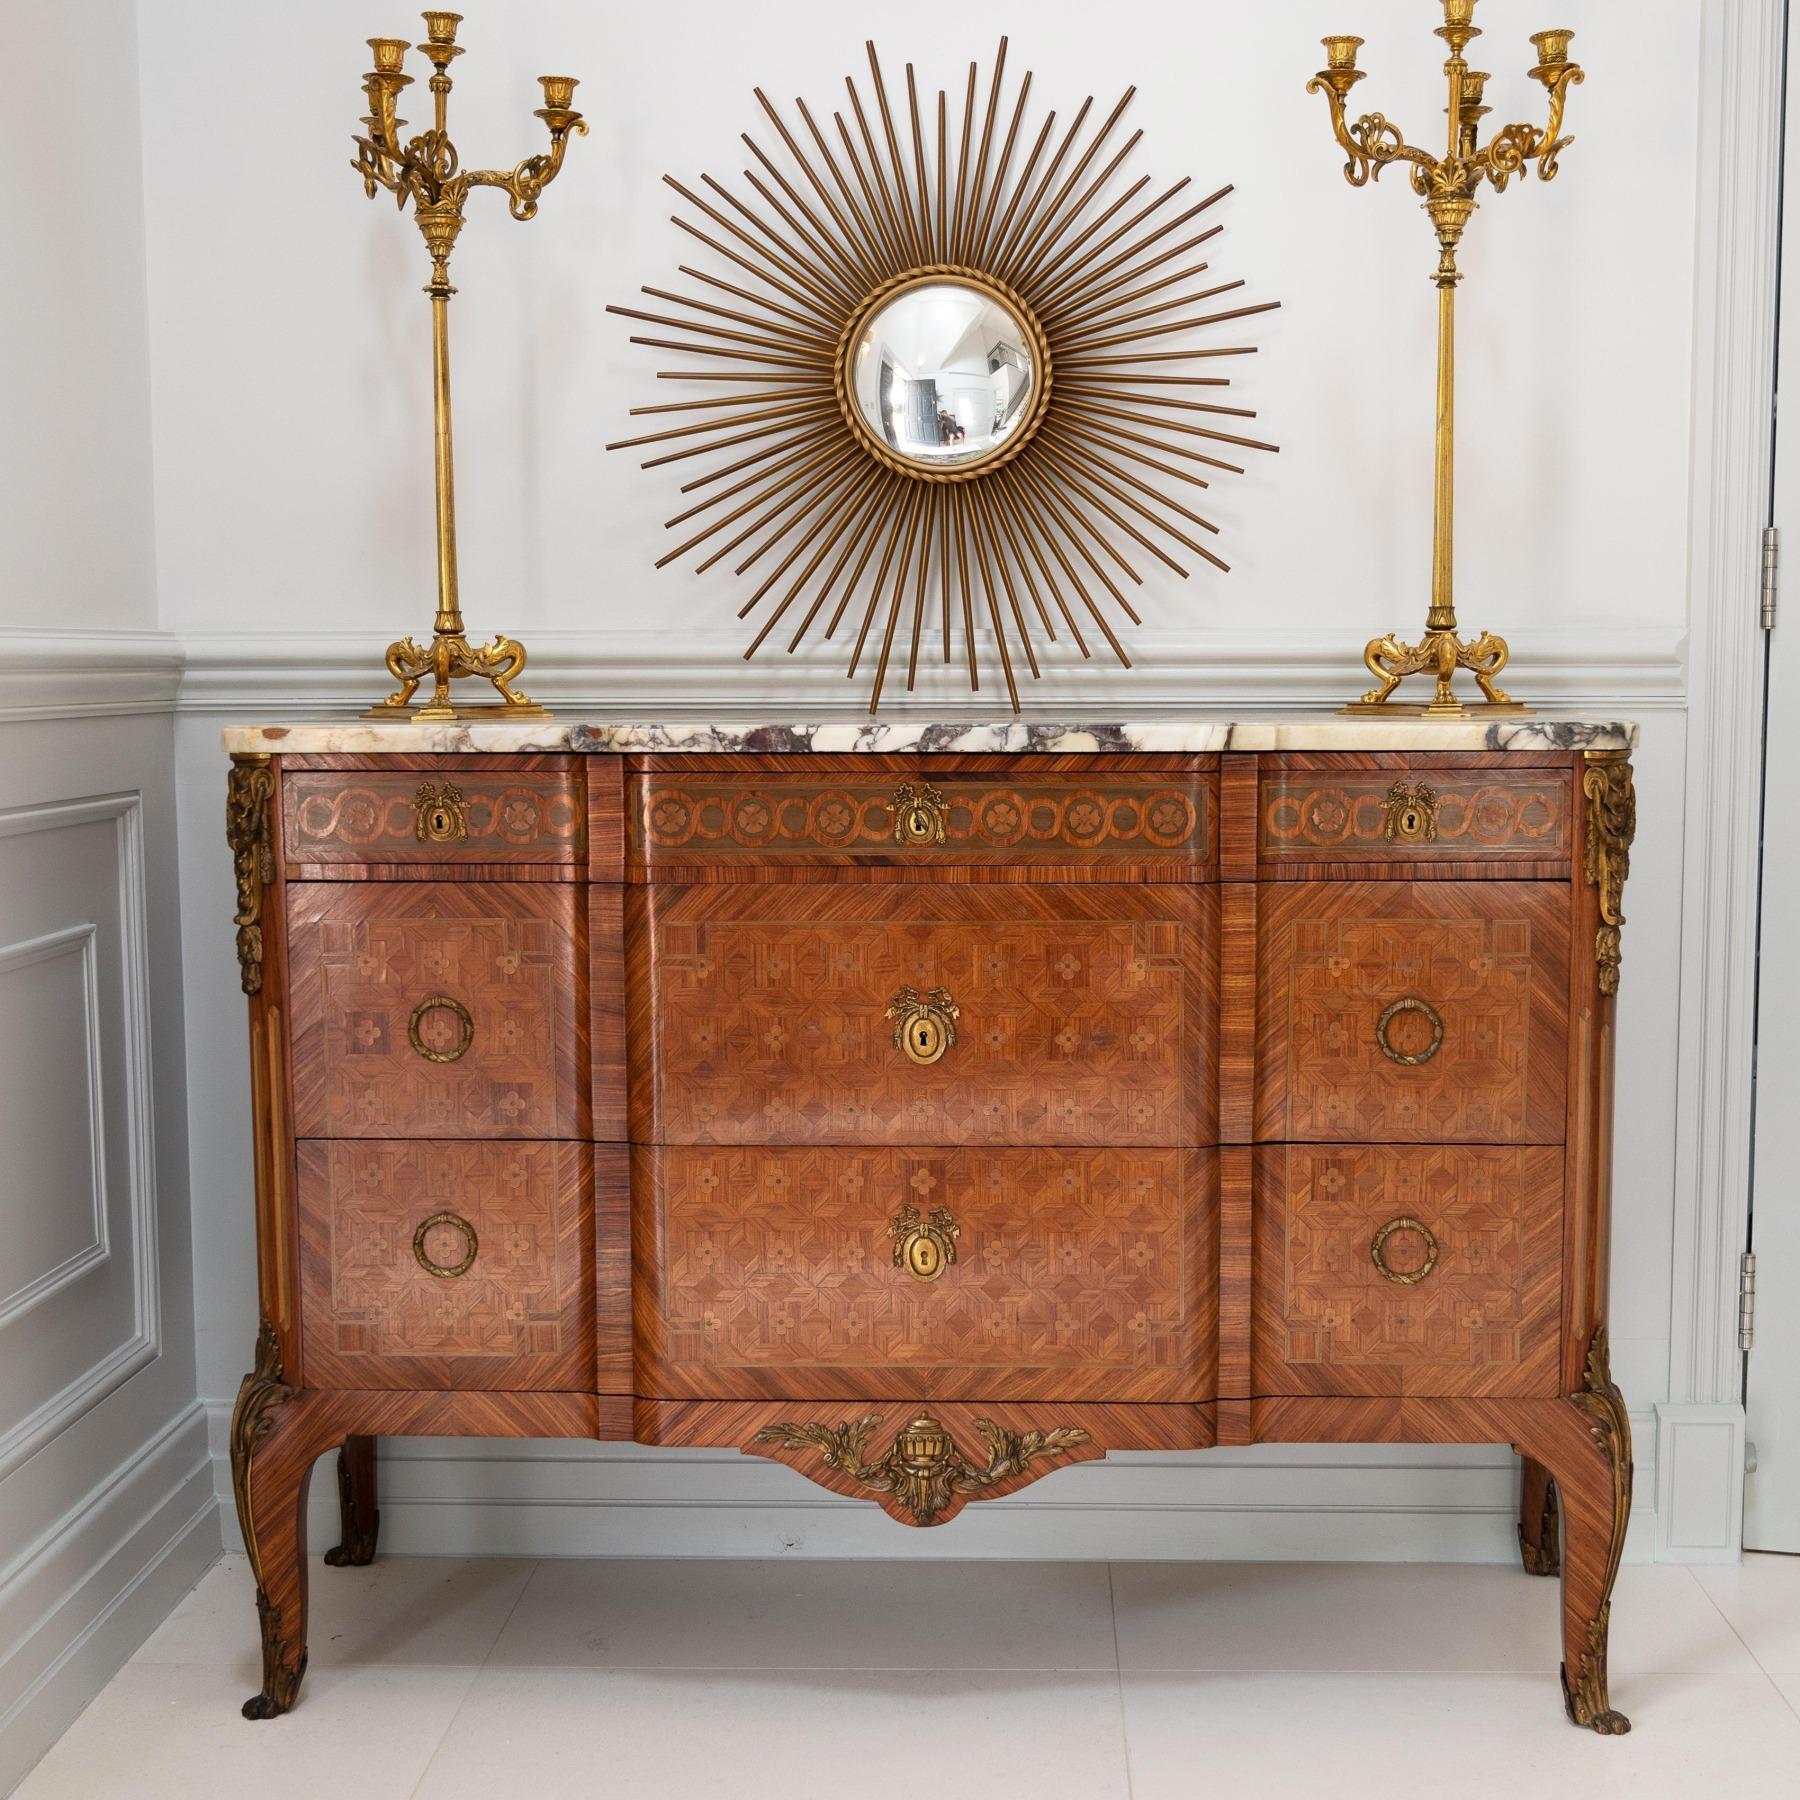 Late 19th Century Gilt Bronze Mounted Tulipwood Kingwood Marble Topped Commode For Sale 3